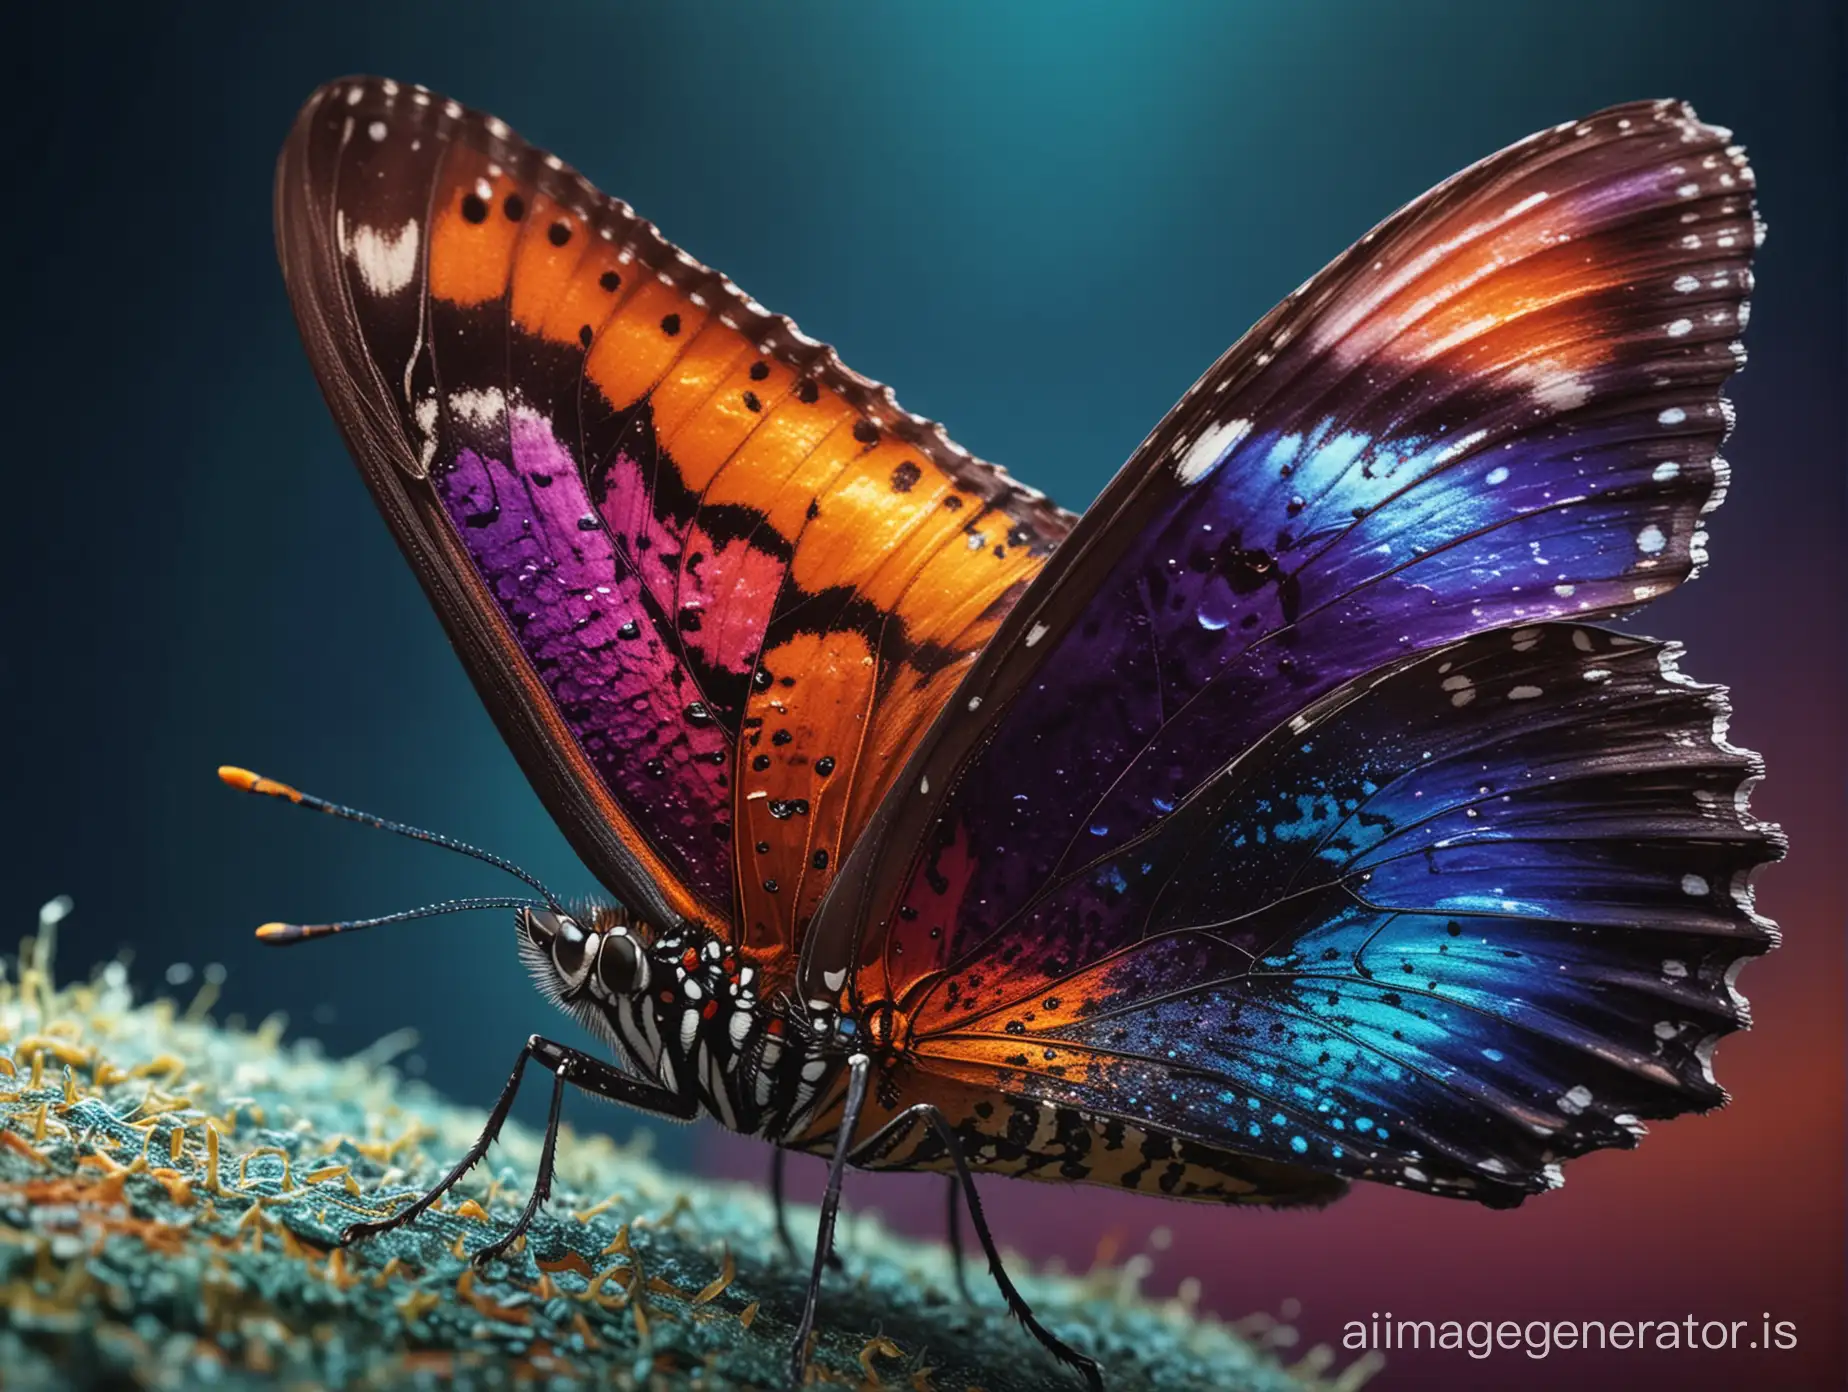 vibrant and vivid 4K resolution image of a butterfly with a scar on its wing, bold and contrasting colors, macro photography, detailed close-up shot, surreal and abstract, digital art